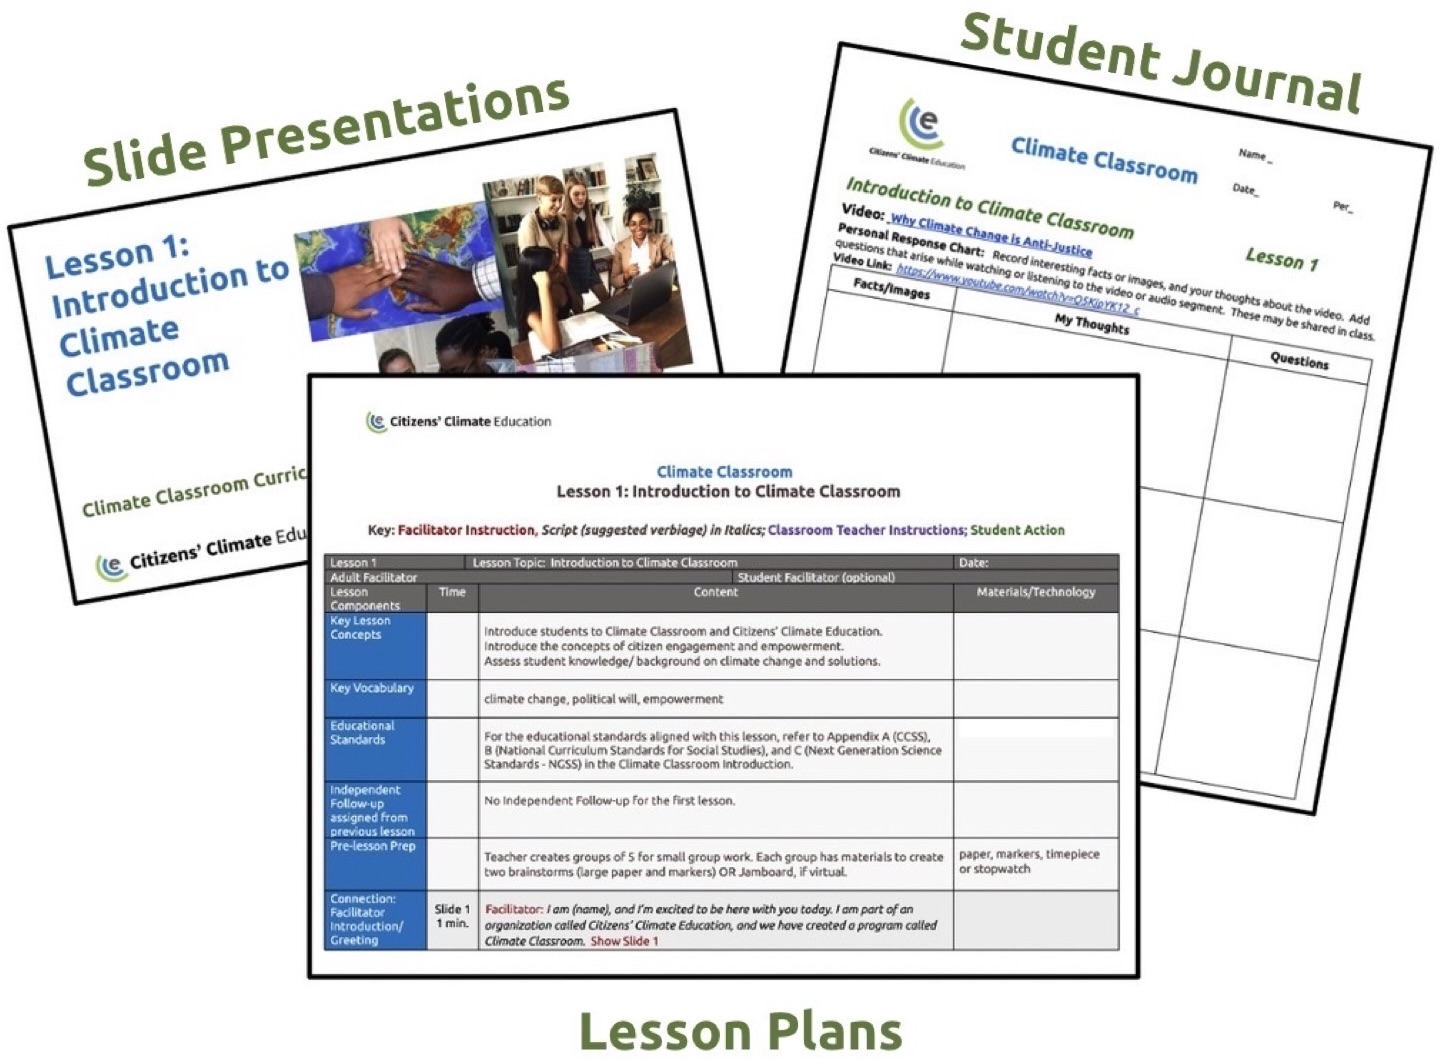 Pictures of Climate Classroom lesson plans, slide presentations, and student journal